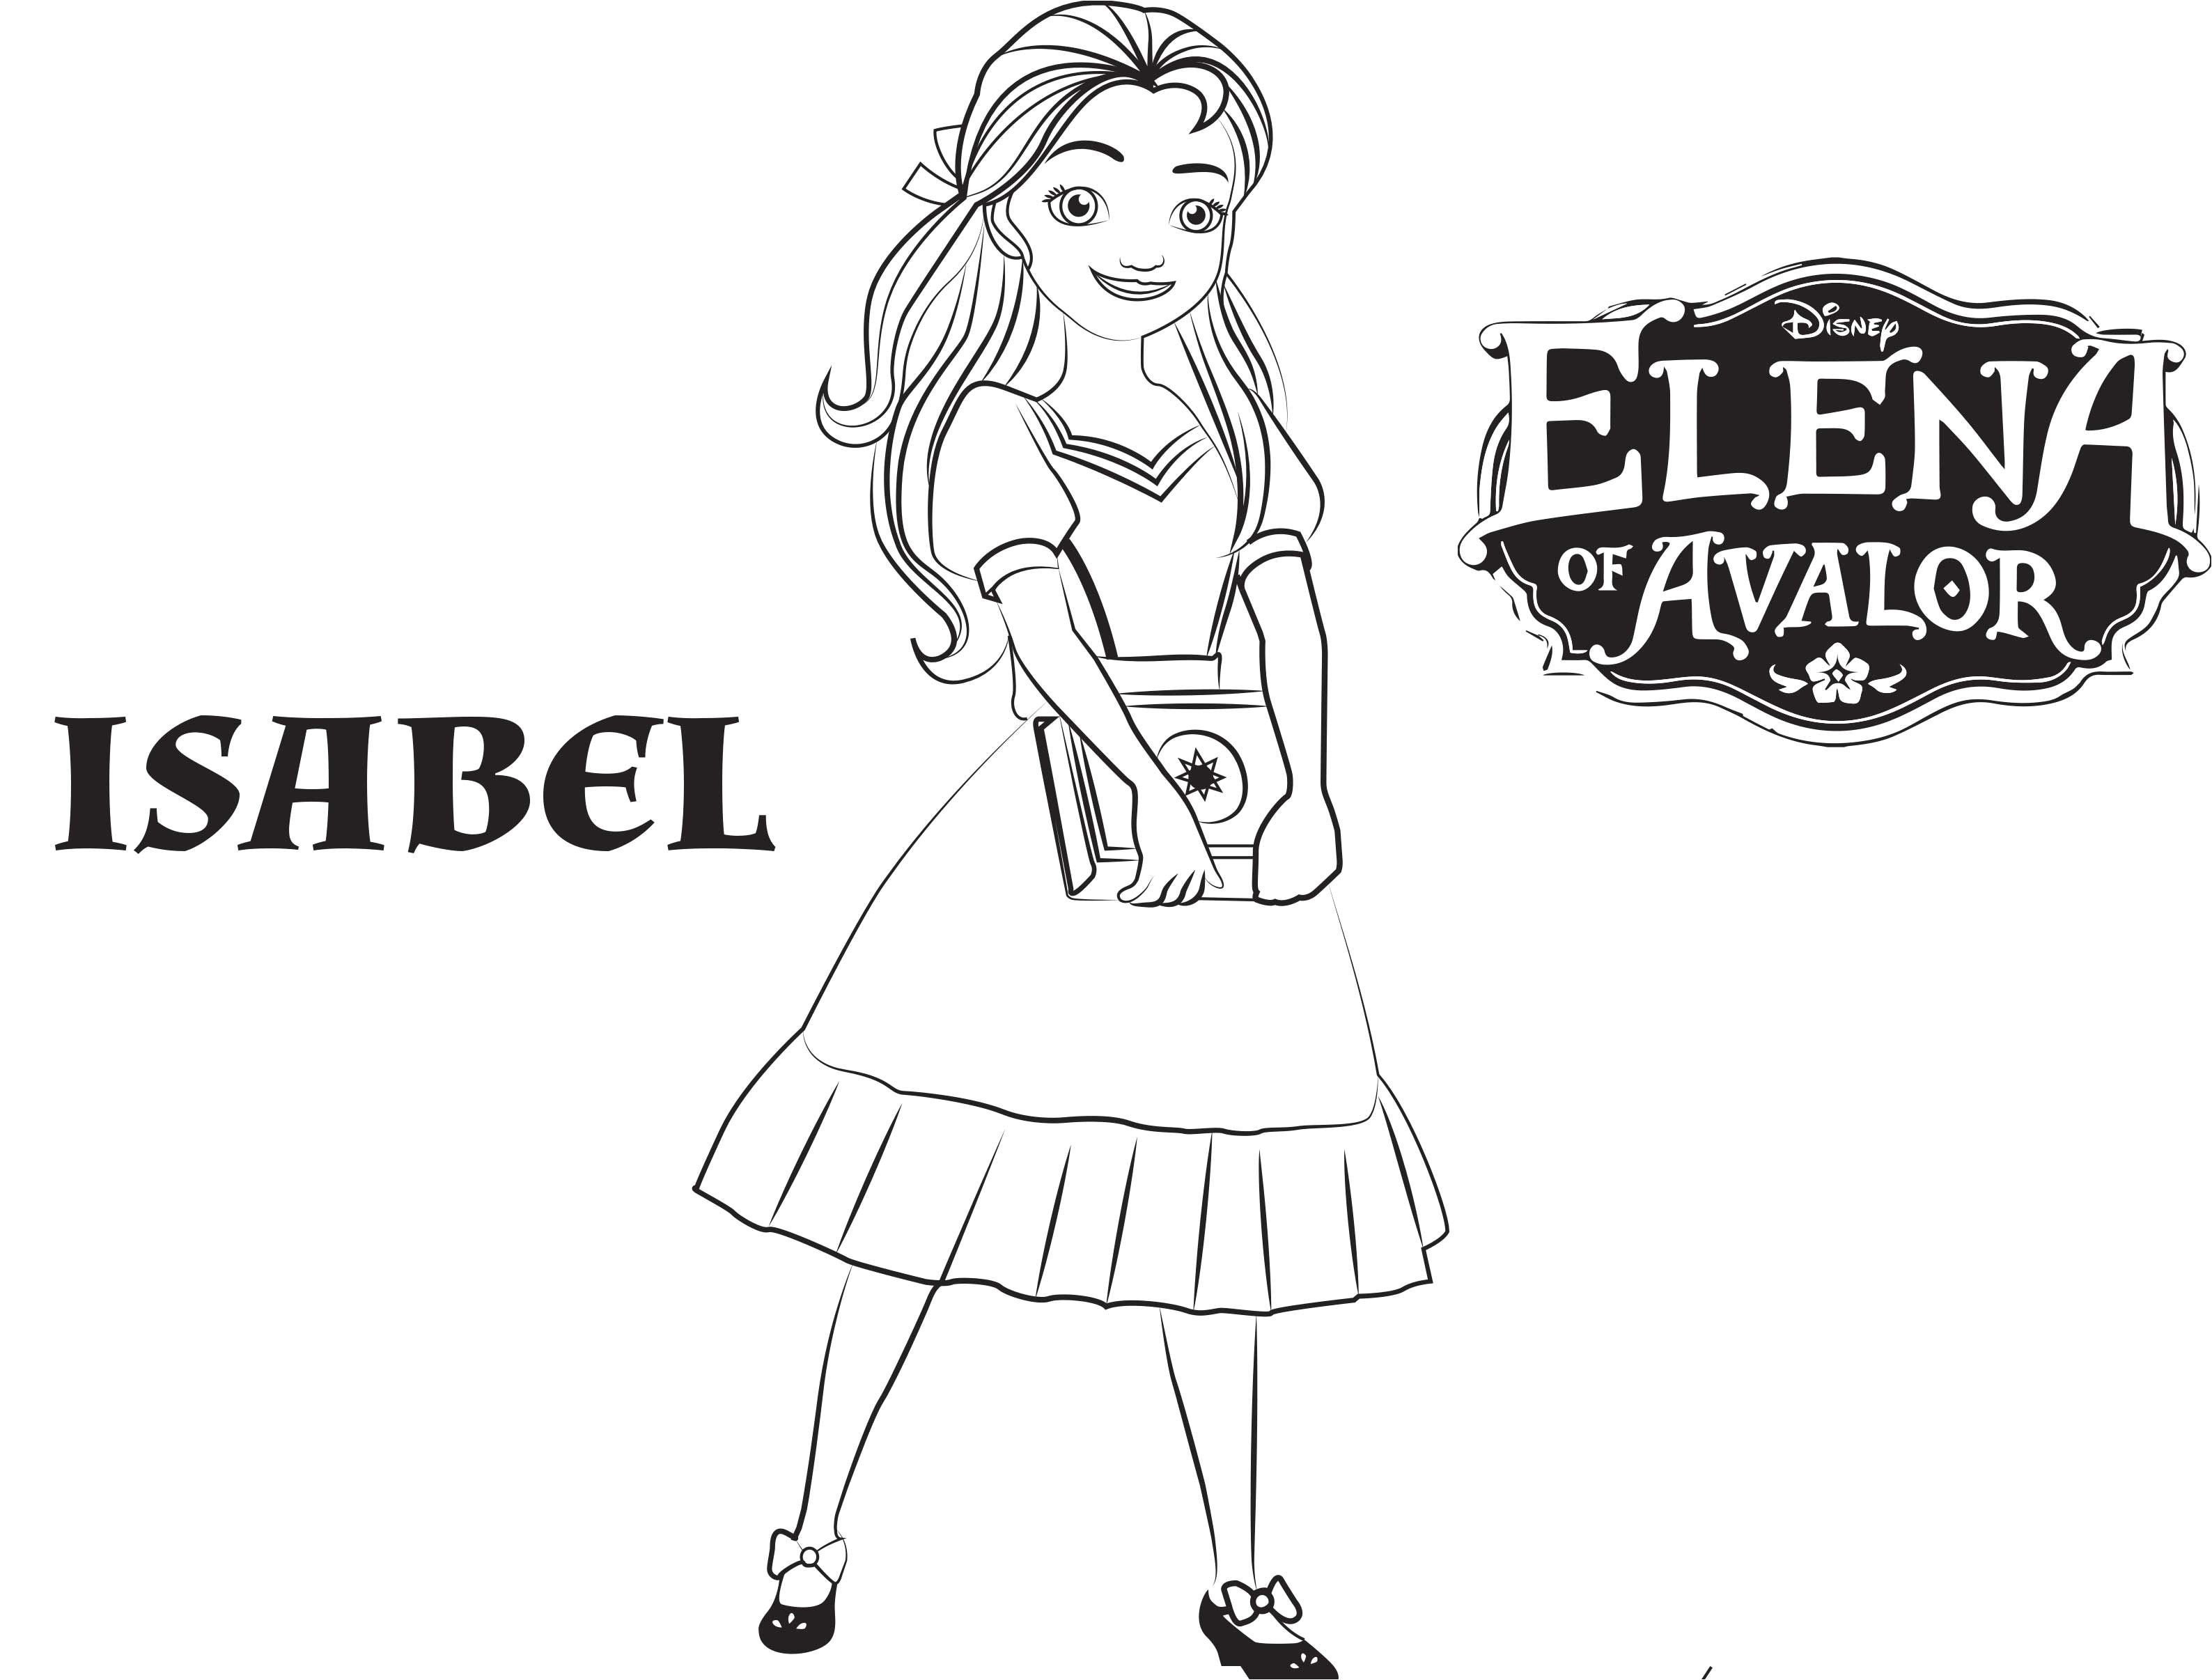 Disney s Elena of Avalor Coloring Pages Sheet Free Disney Printable Elena of Avalor Color Page